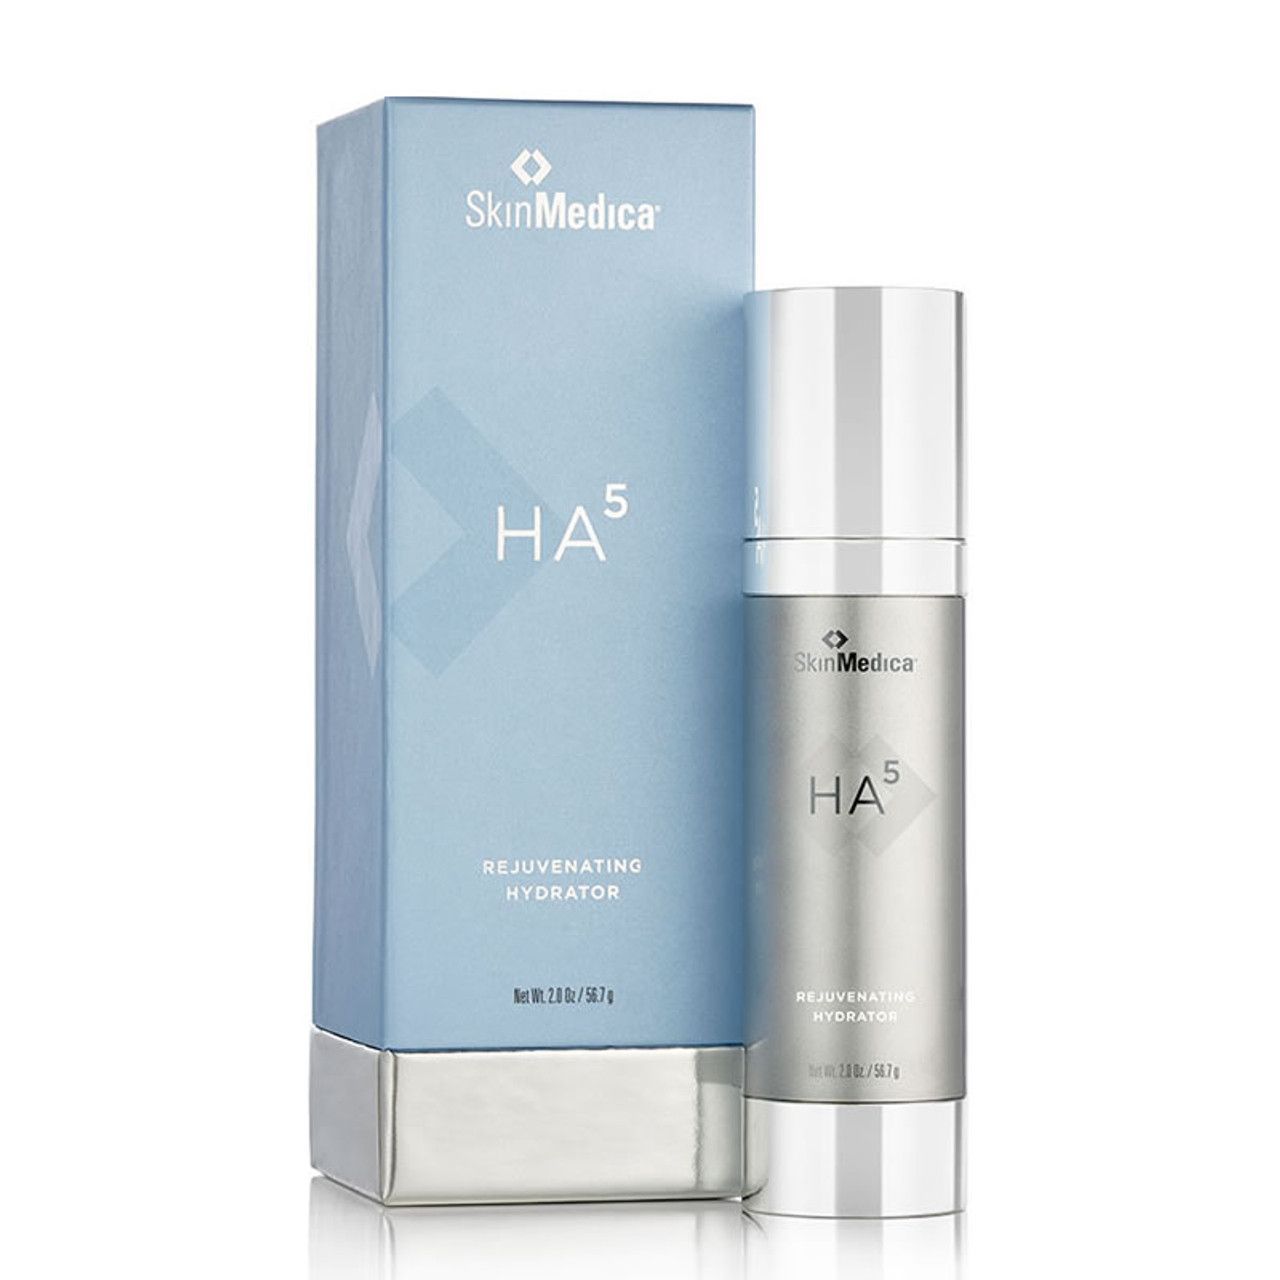 a bottle of skinmedica HA5 next to its box